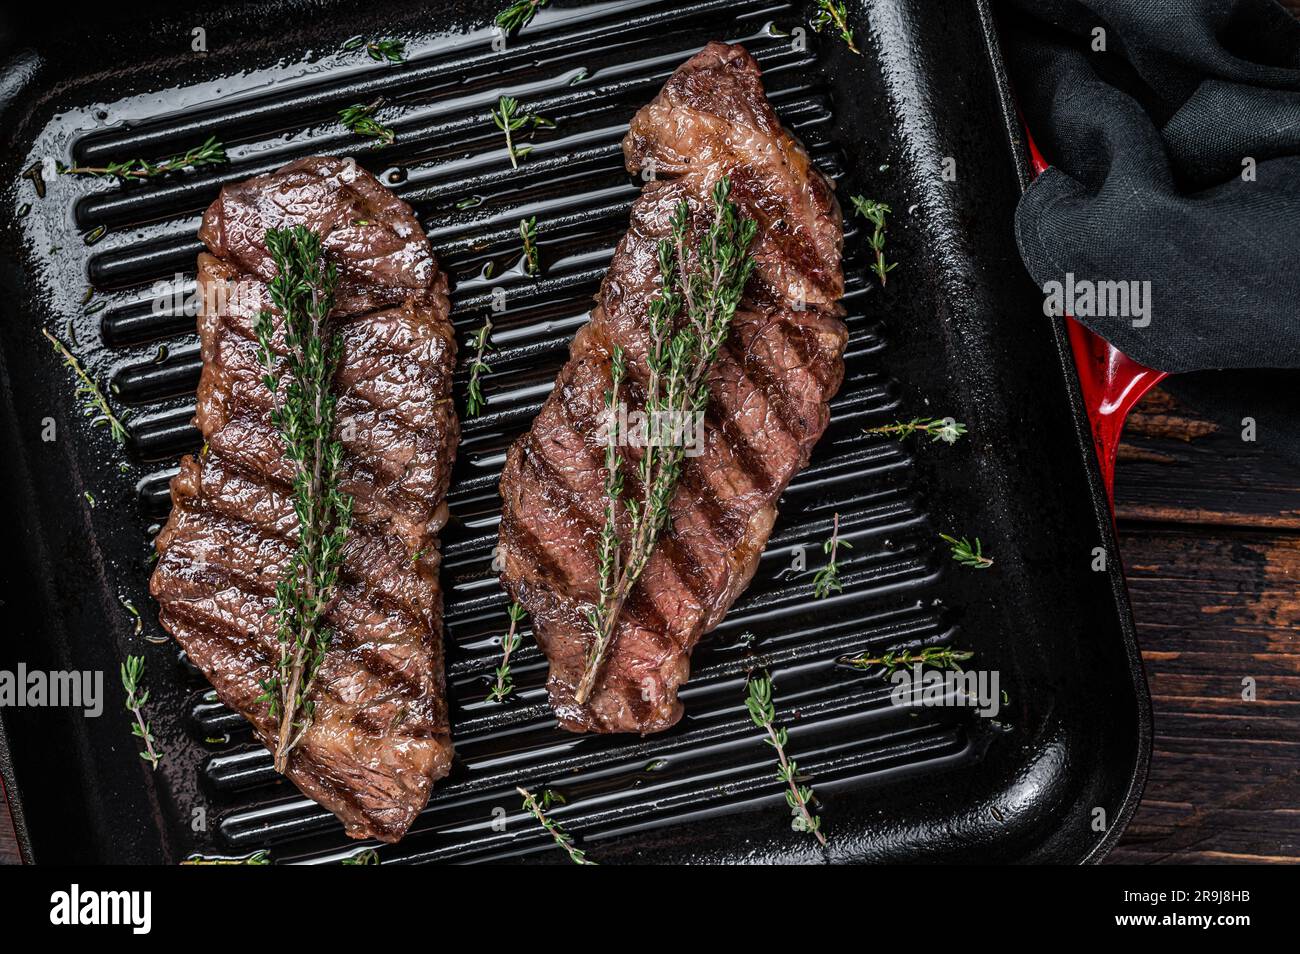 Fried denver beef meat steak with thyme in a grill skillet. Wooden background. Top view. Stock Photo